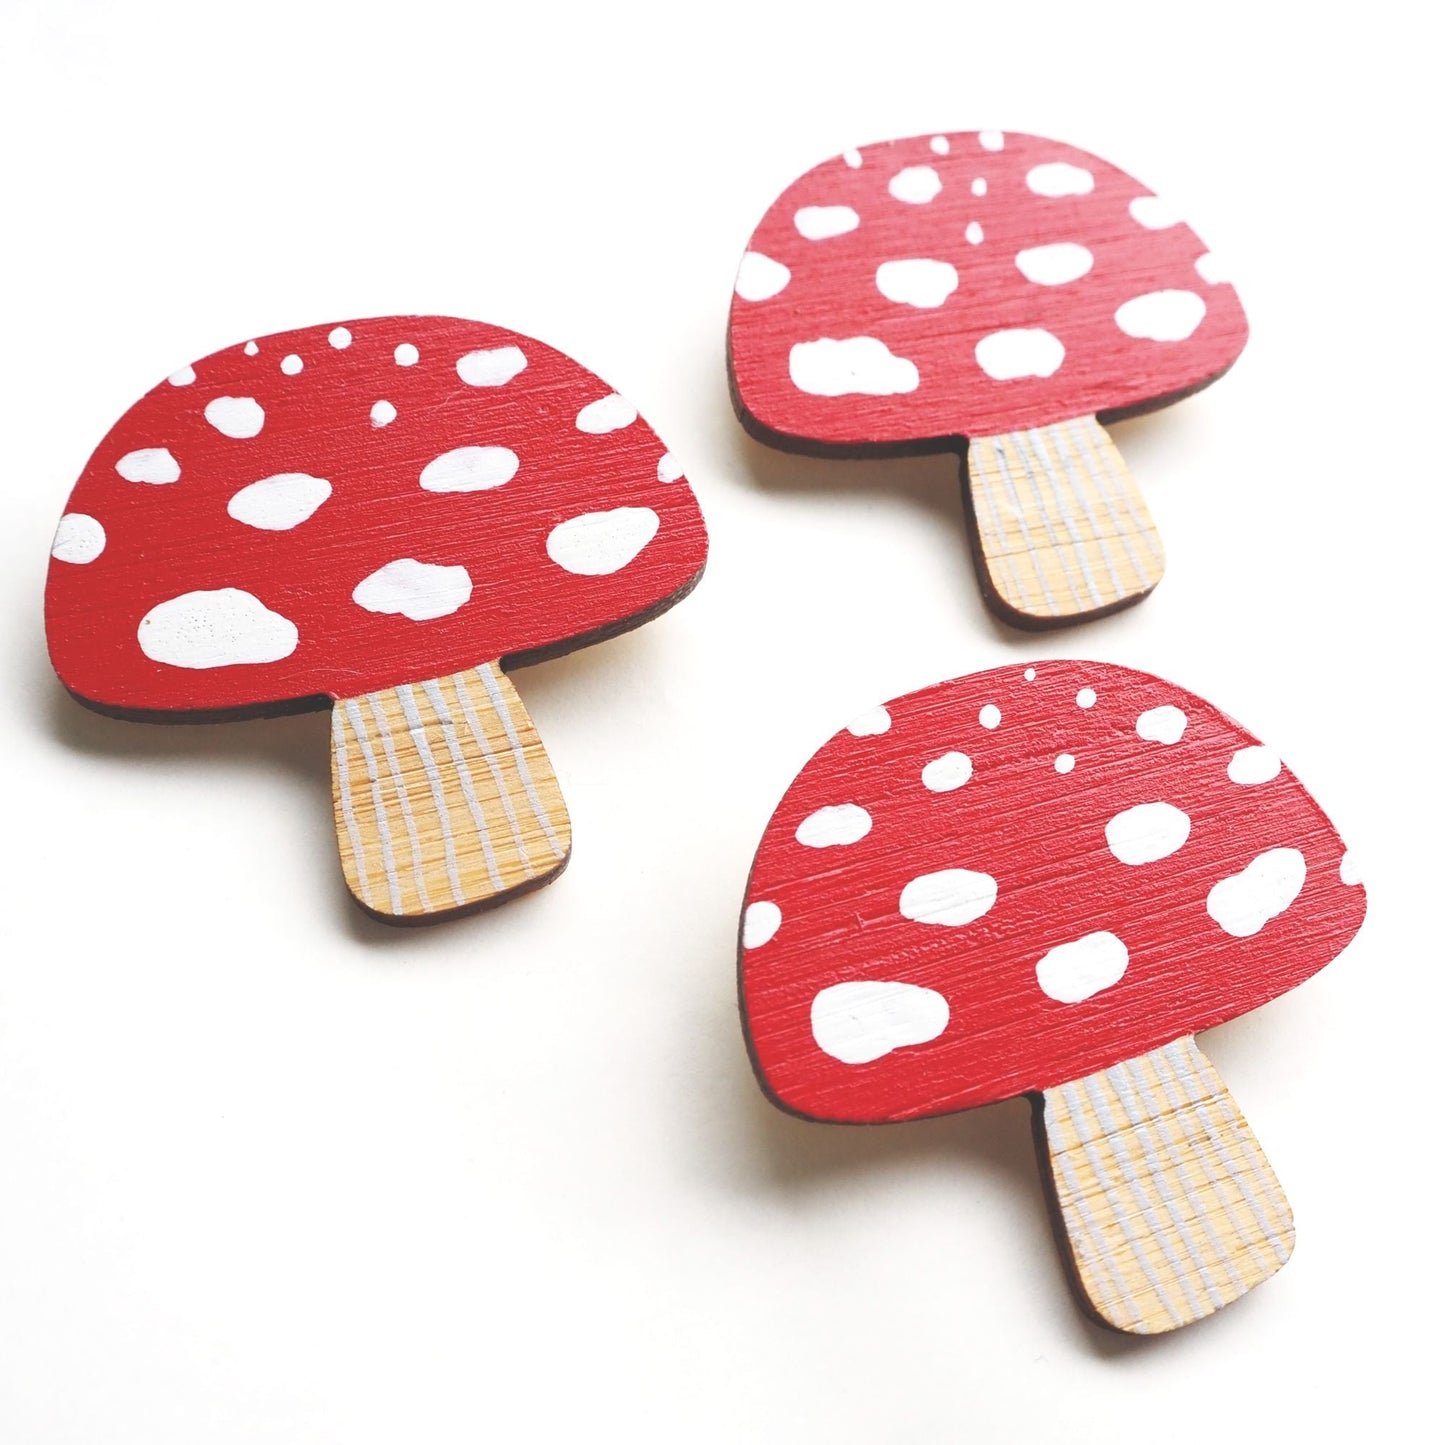 Three toadstool brooches arranged in a triangle on a white background.